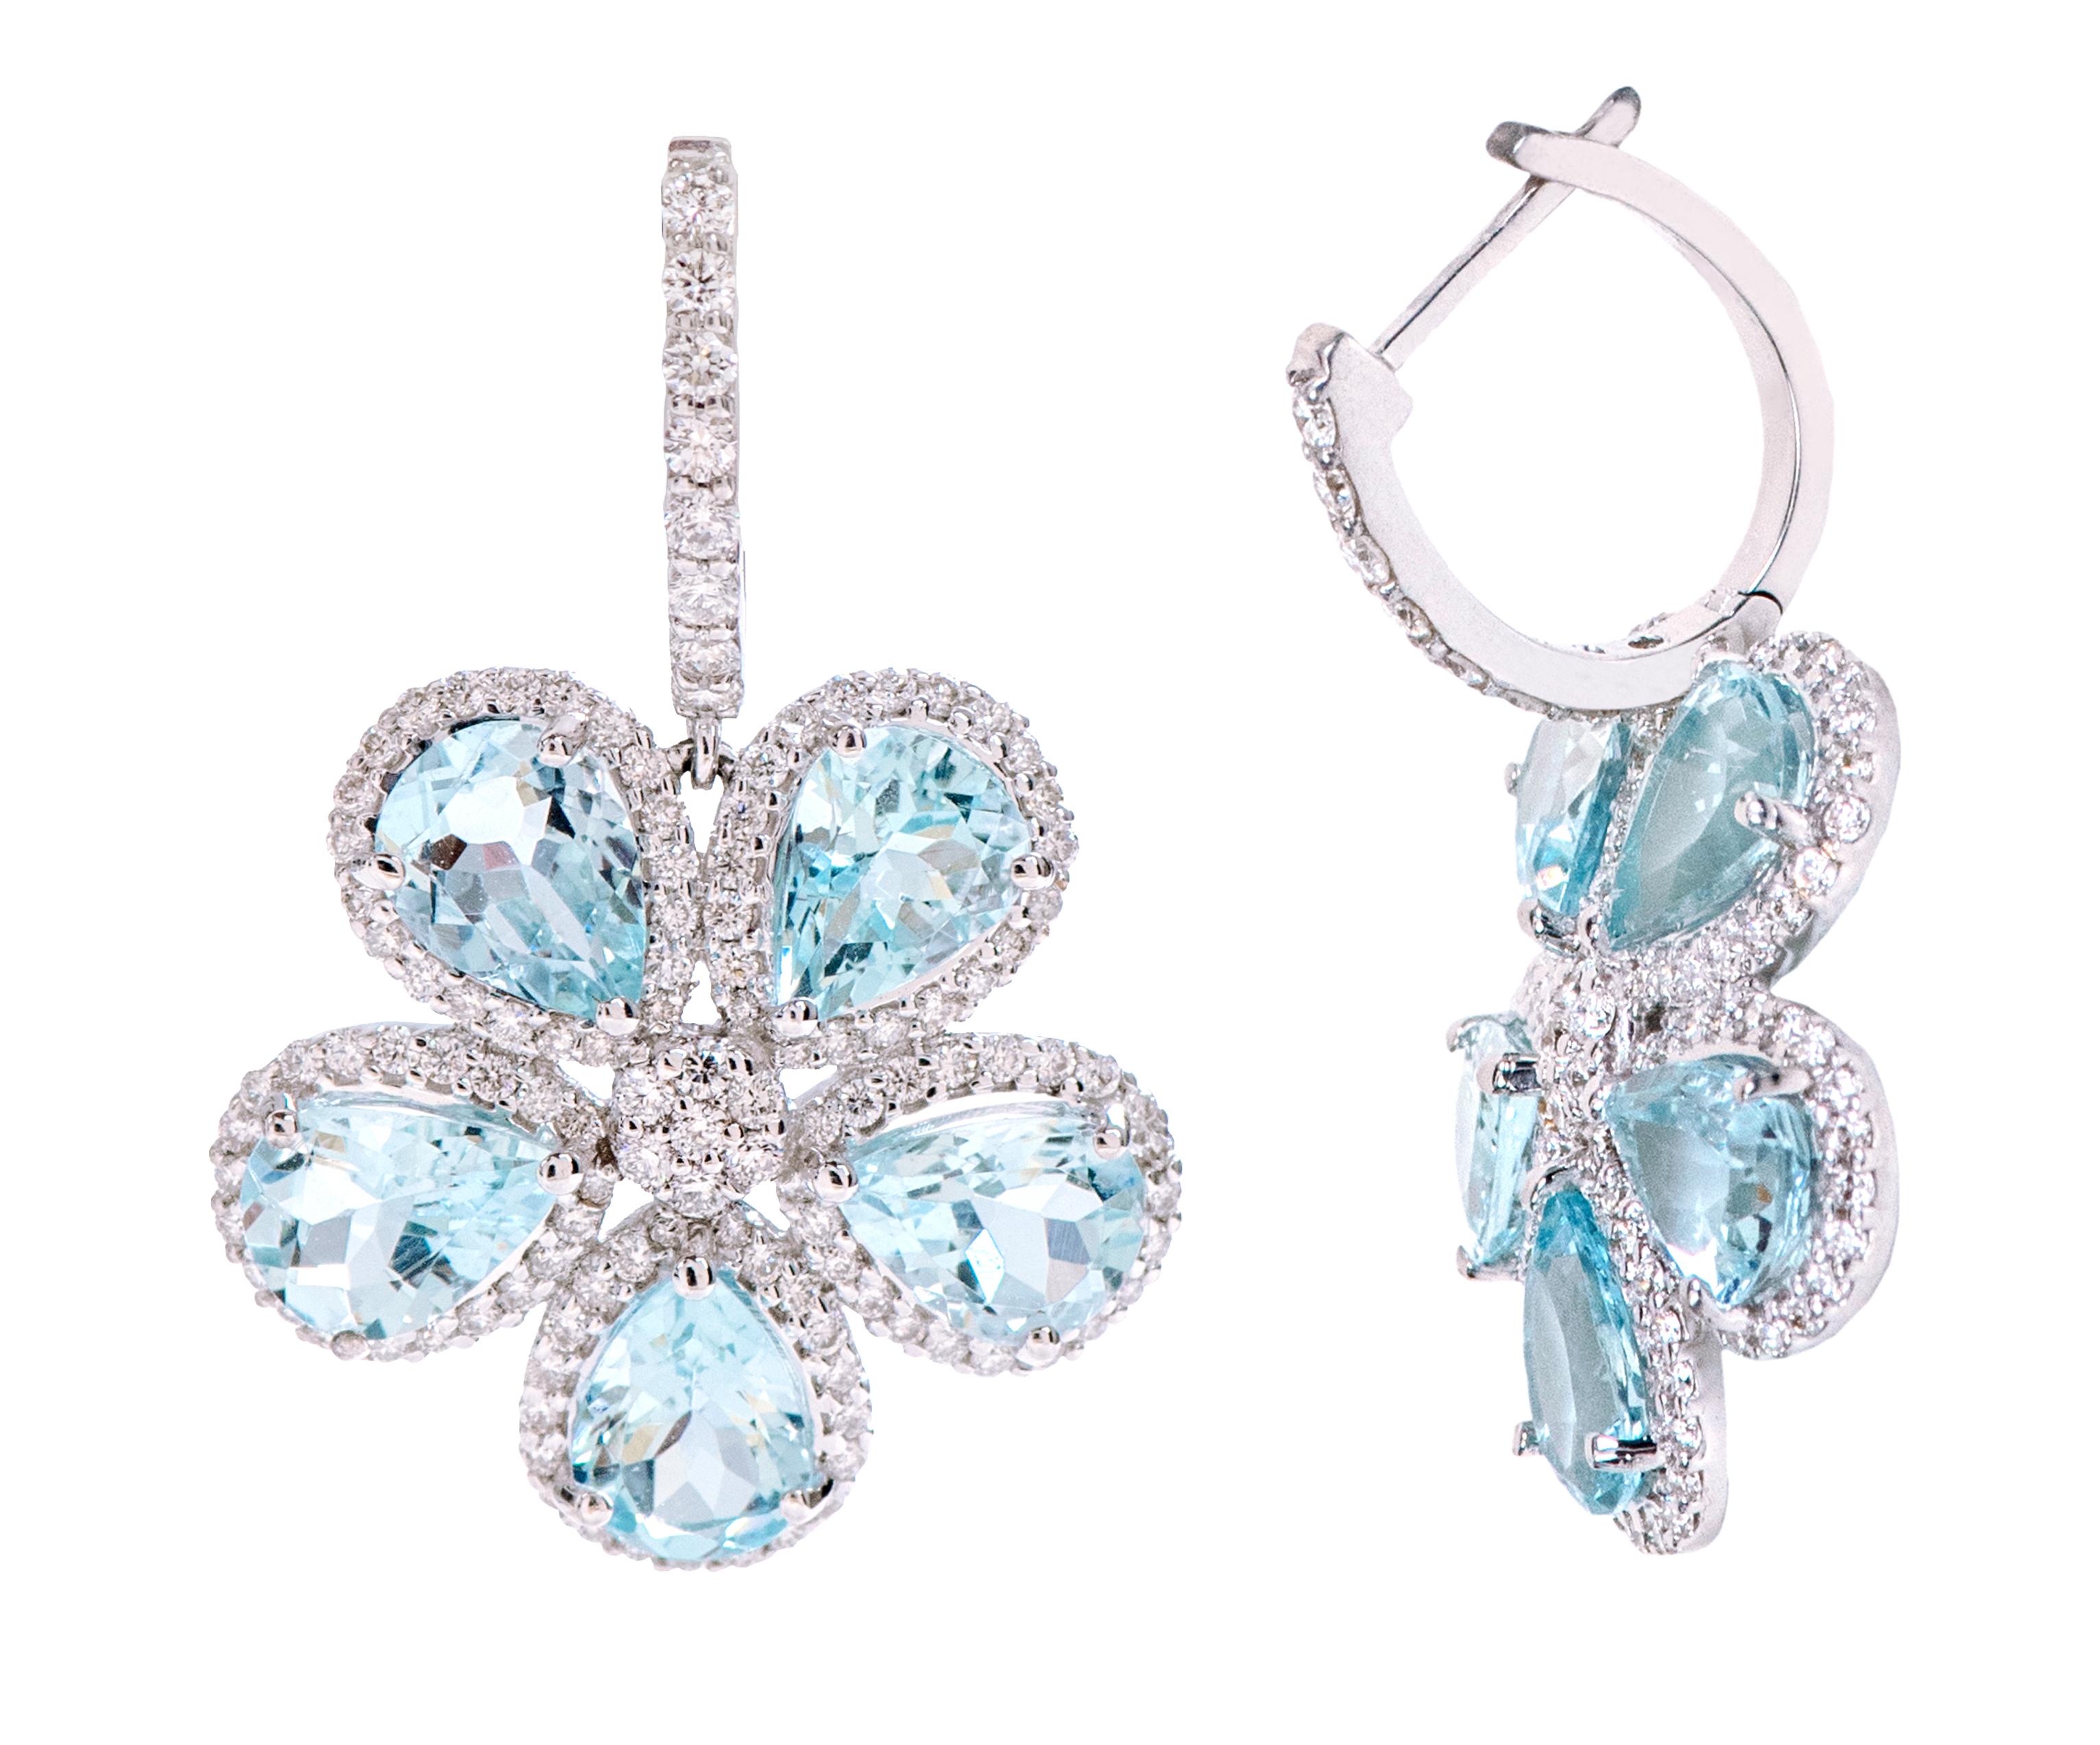 18 Karat White Gold 7.86 Carat Aquamarine and Diamond Flower Statement Dangle Earrings

This sensational celeste aquamarine and diamond earring is articulate. The floral earring design shows our love for nature and its eminent beauty. The short and